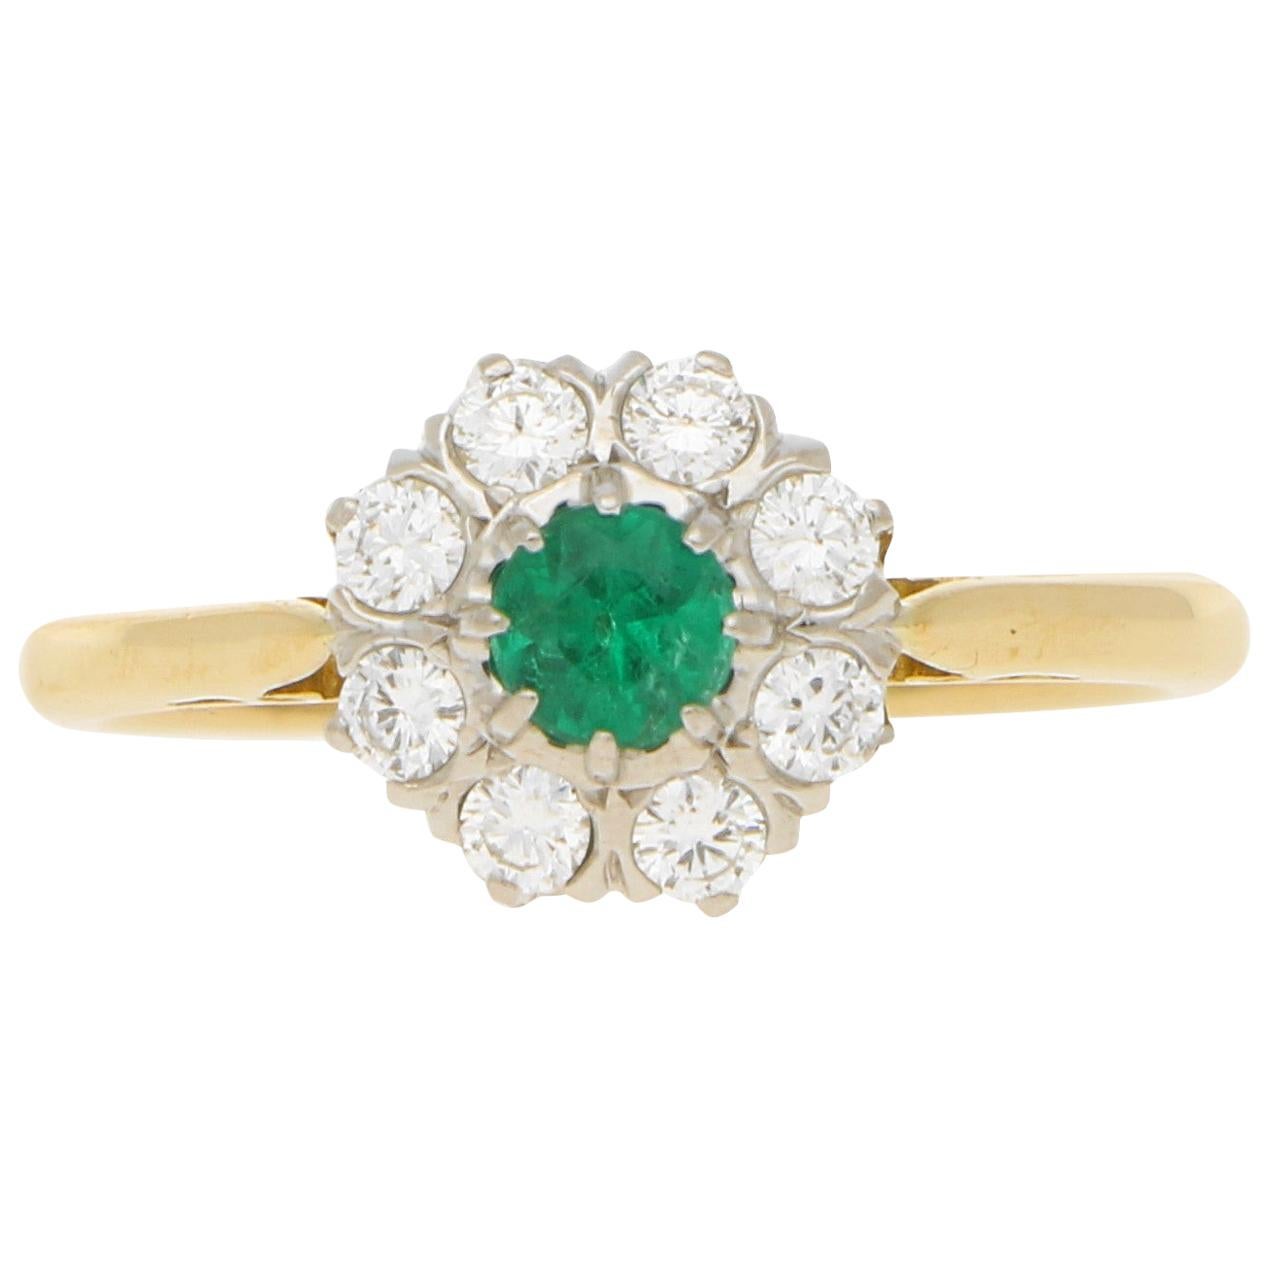 Emerald and Diamond Daisy Cluster Engagement Ring Set in 18 Karat Yellow Gold